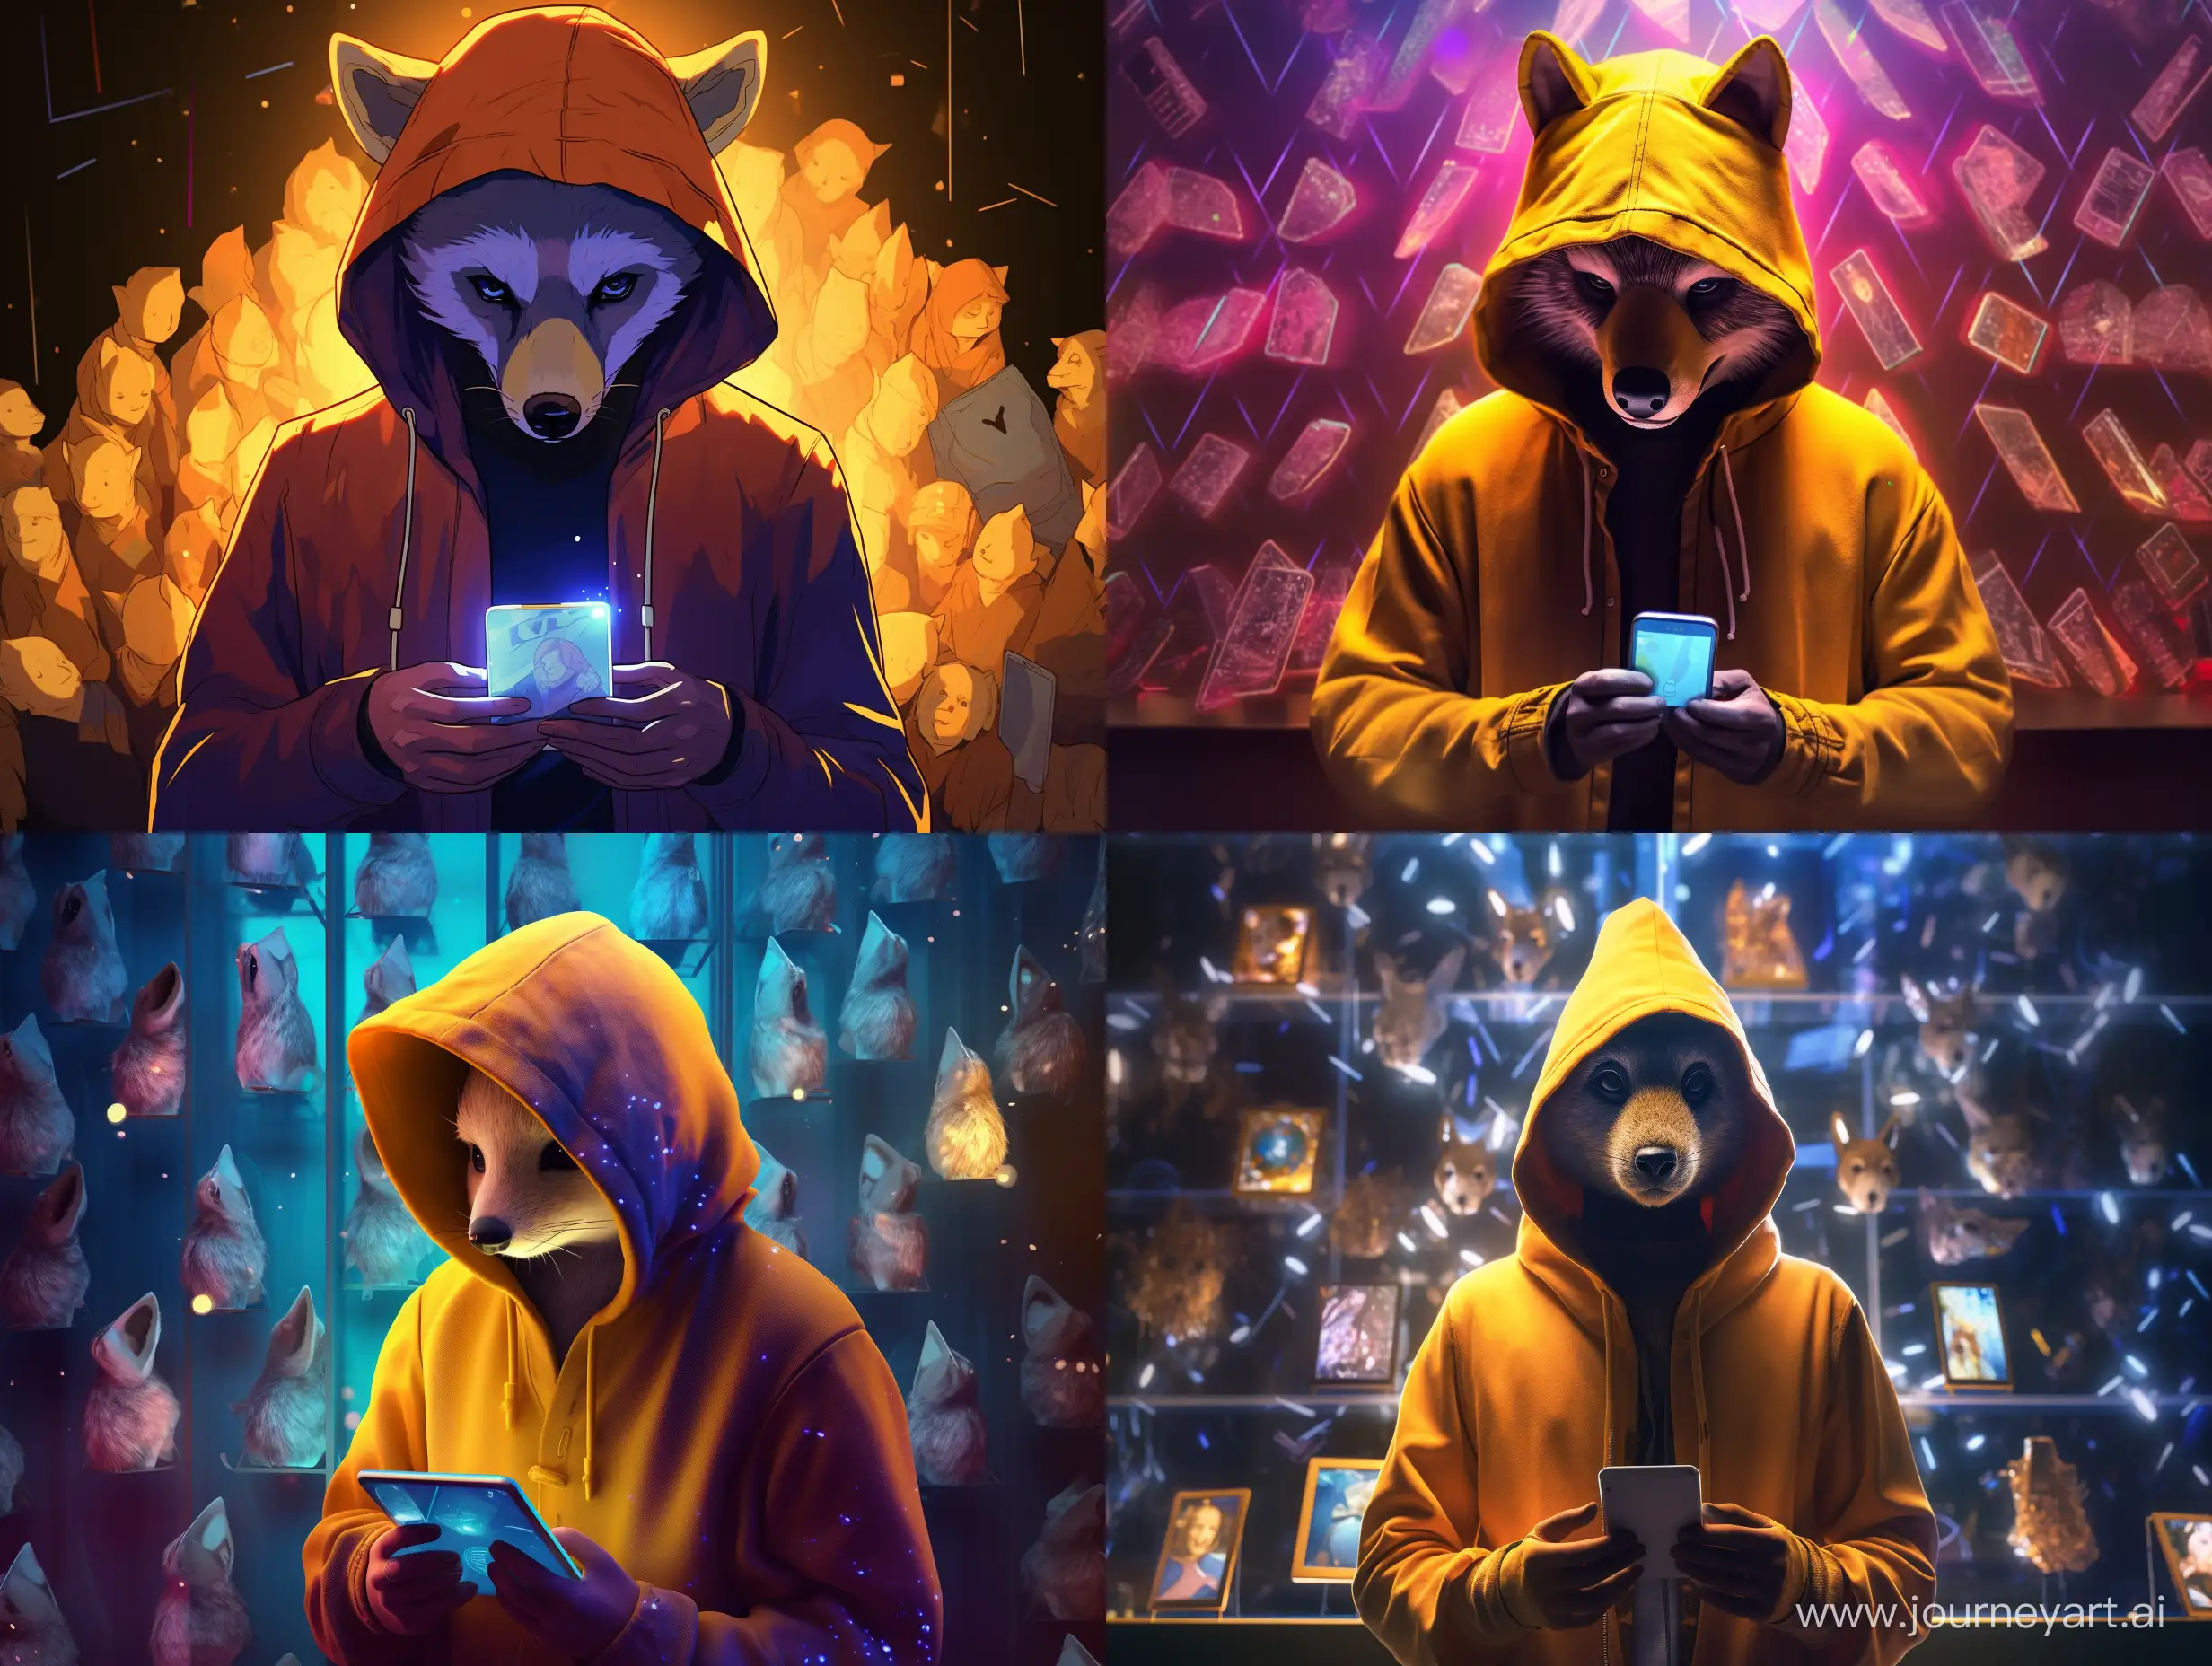 Urban-Explorer-in-Yellow-Hoodie-with-Raccoon-Mask-Surrounded-by-Shards